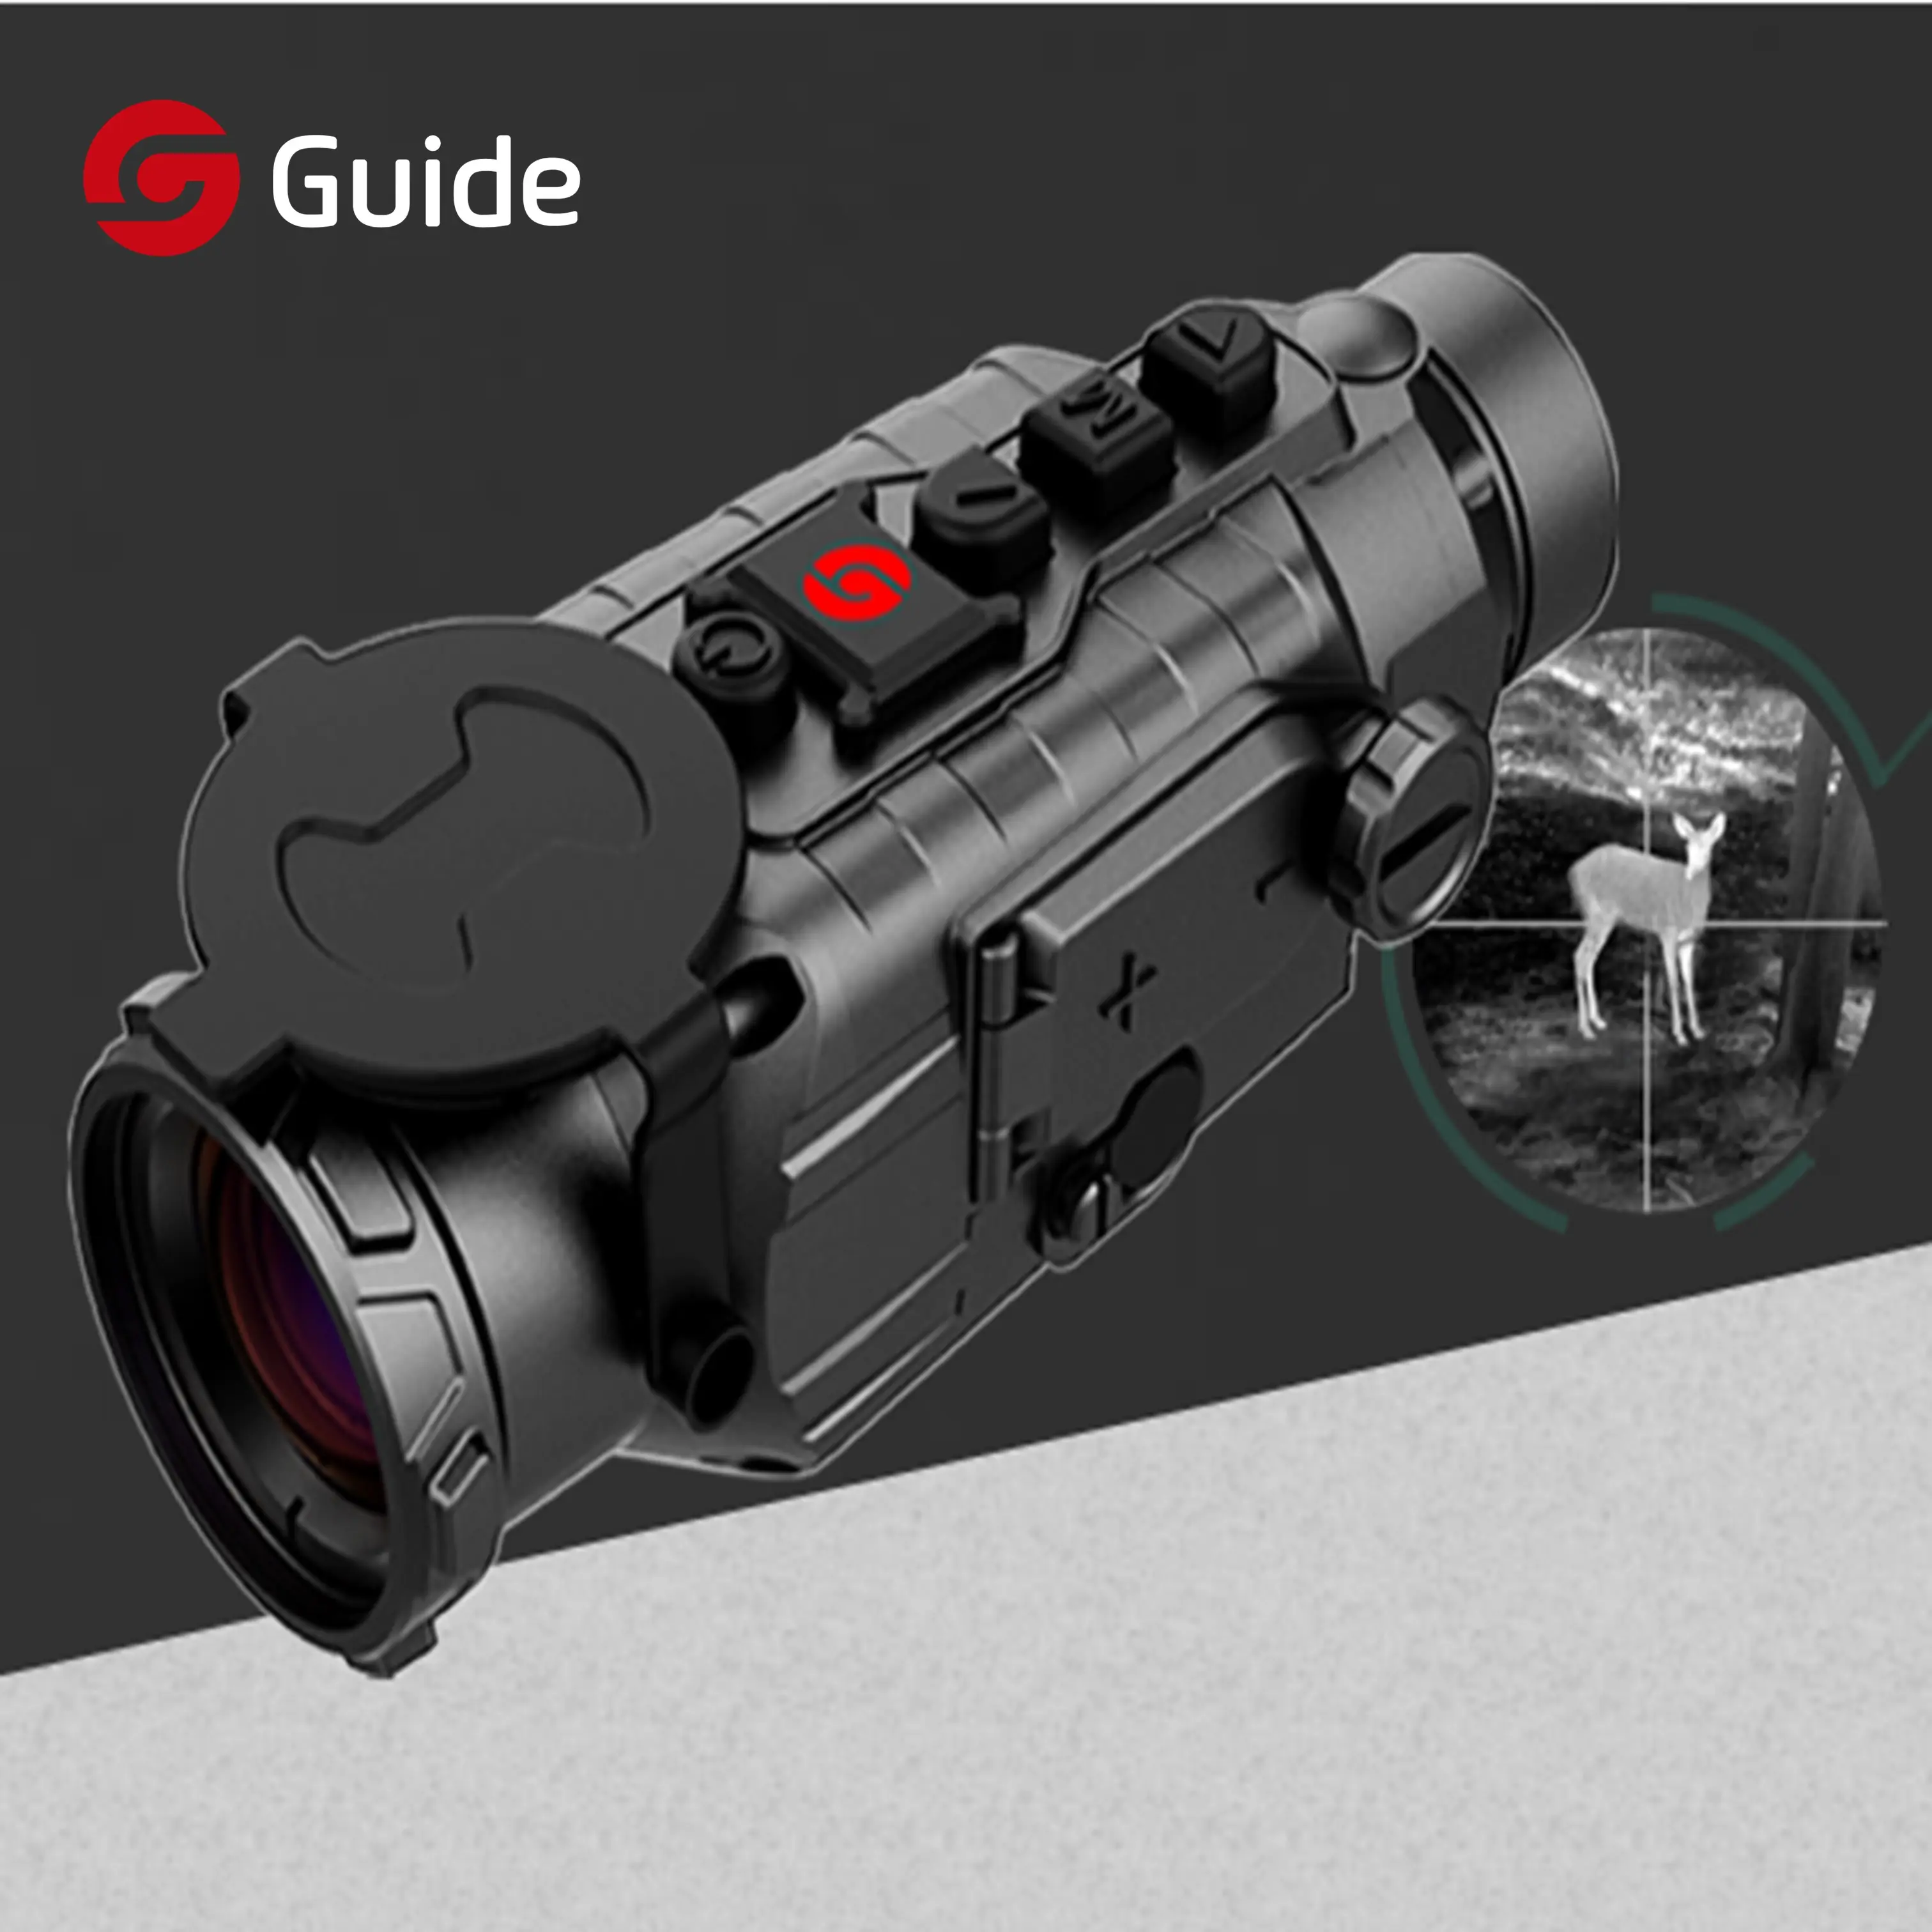 Hot Spot Tracking Long Range Thermal Clip On Scope Riflescope Attachment Thermal Clip On Riflescope Attachment Hunt For Weapon